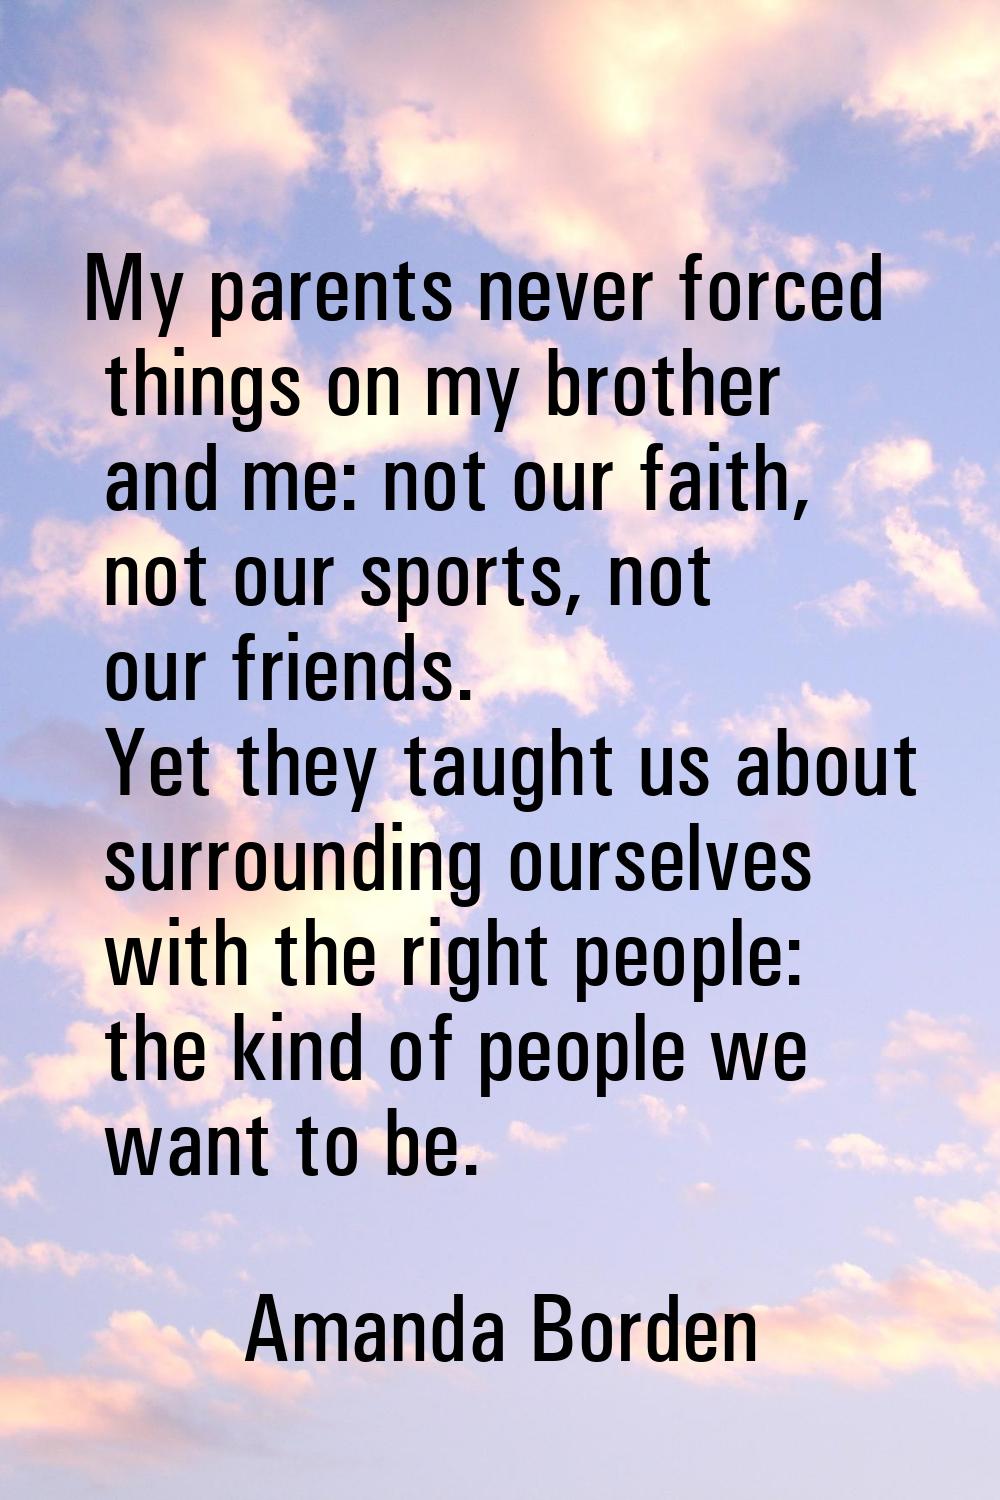 My parents never forced things on my brother and me: not our faith, not our sports, not our friends